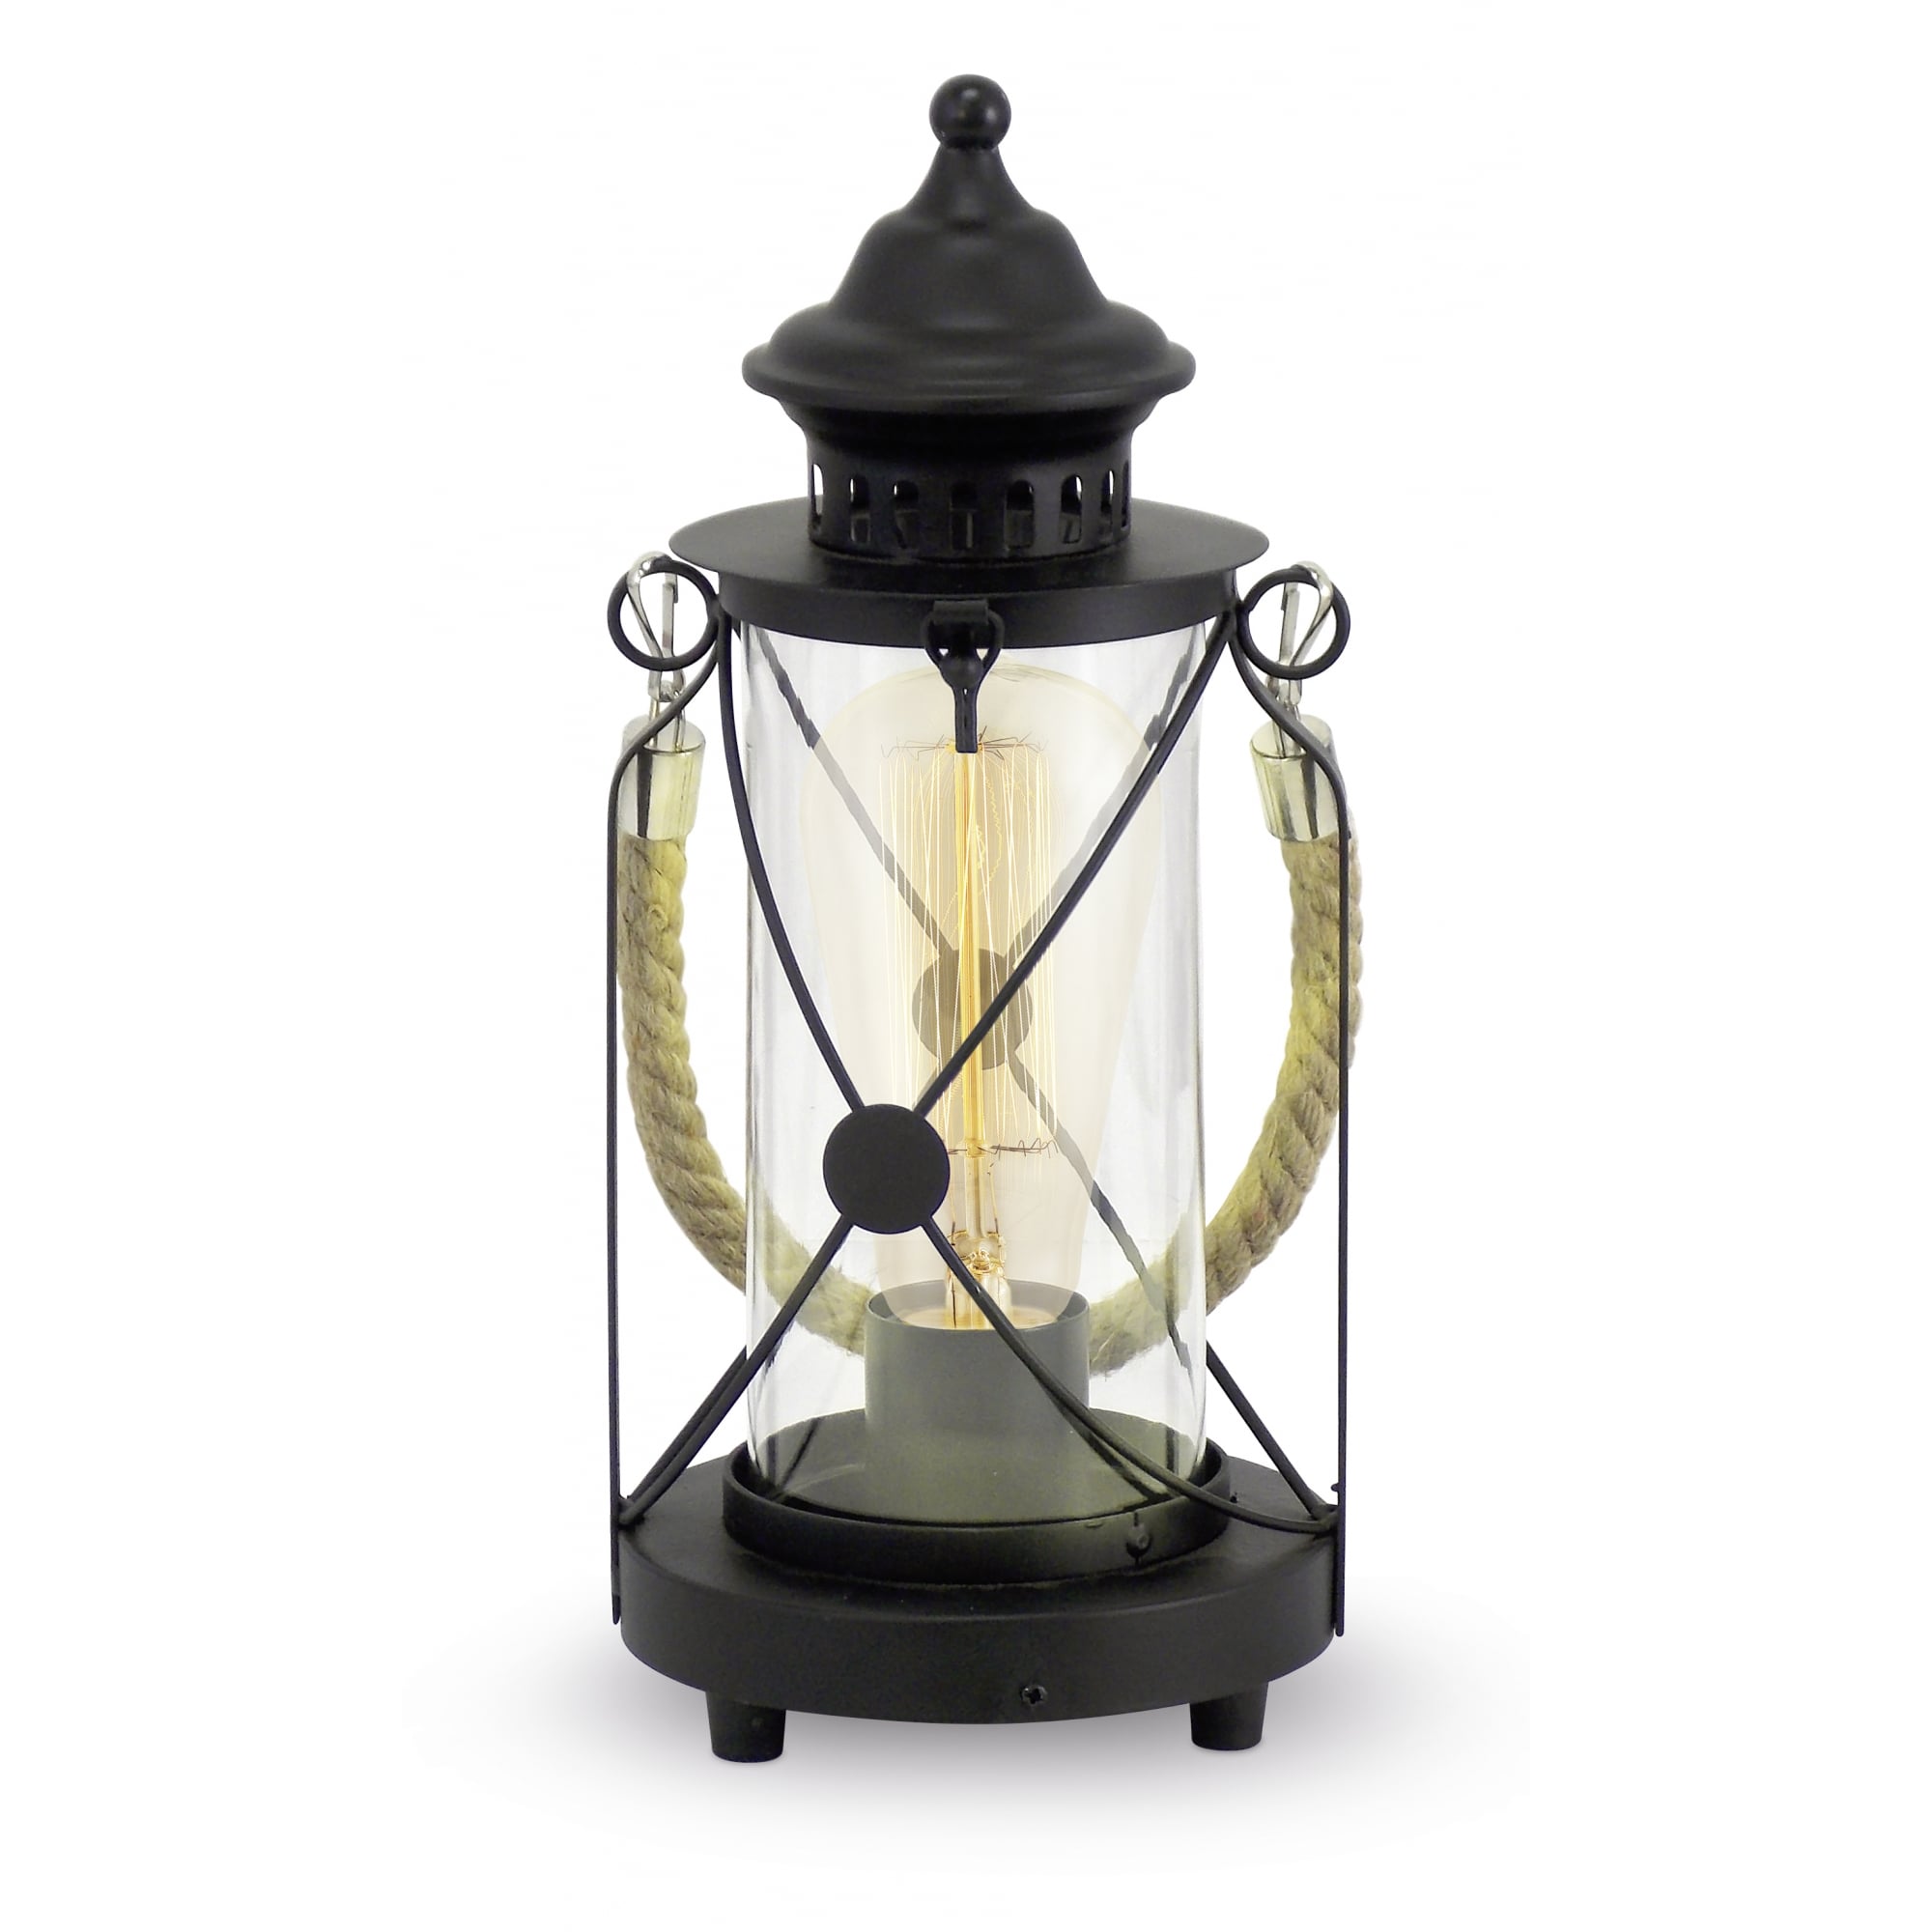 Traditional Rustic E27 Table Lamp with Rope Handle, Bradford